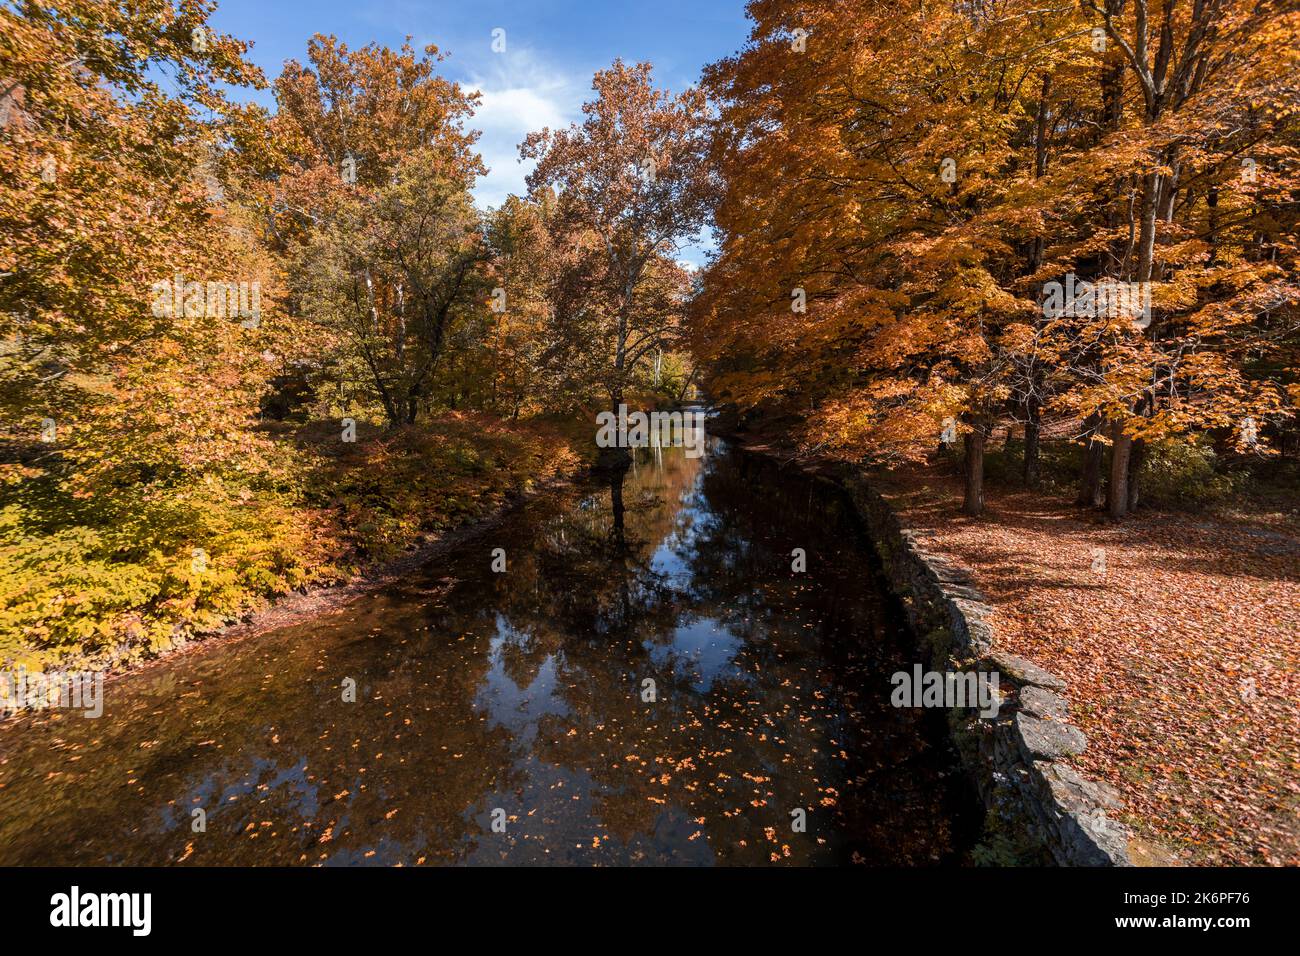 Stone Arch Bridge in Callicoon, NY, Catskill Mountains, surrounded by brilliant fall foliage on a bright autumn morning Stock Photo